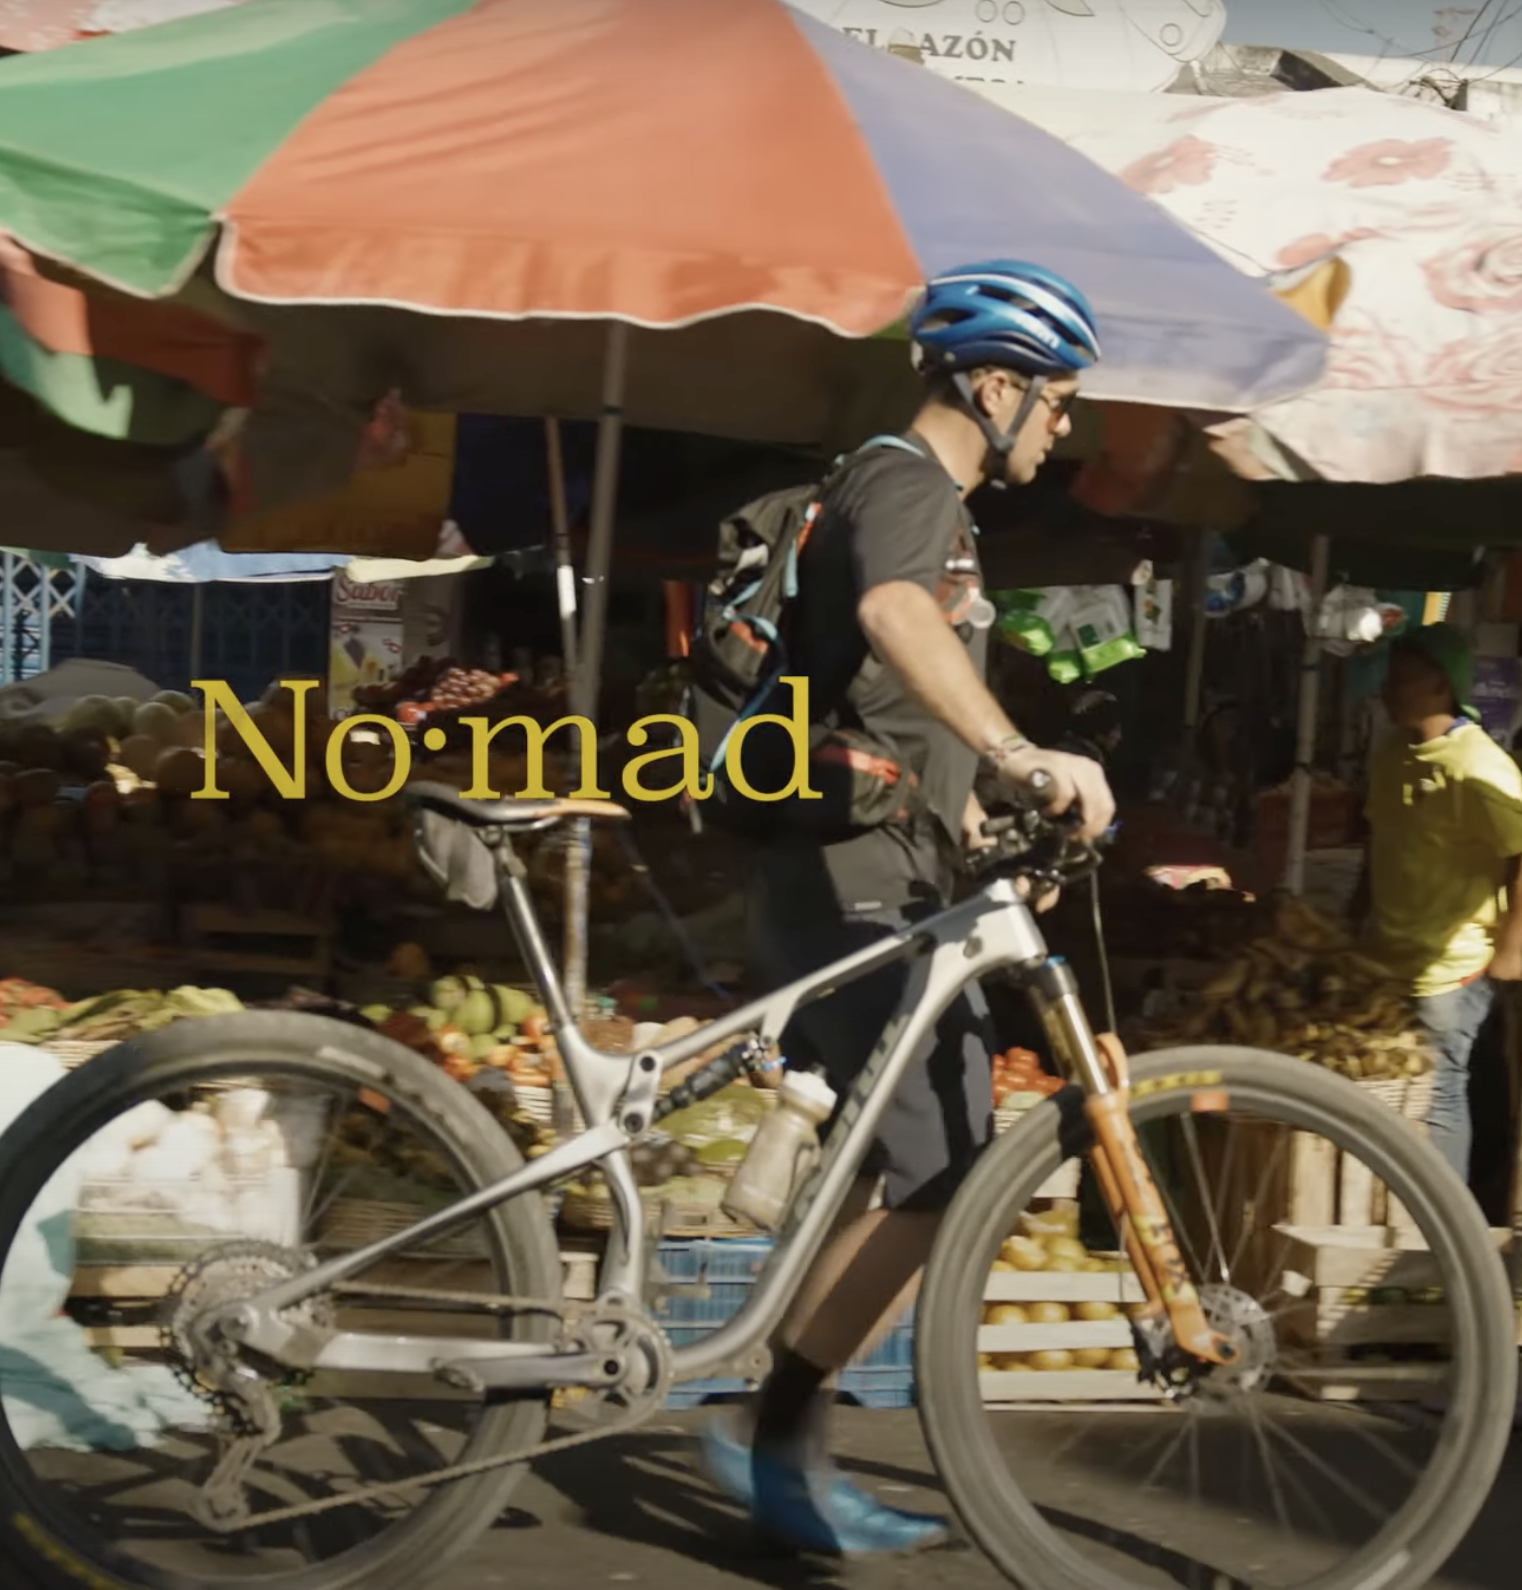 the-nomad